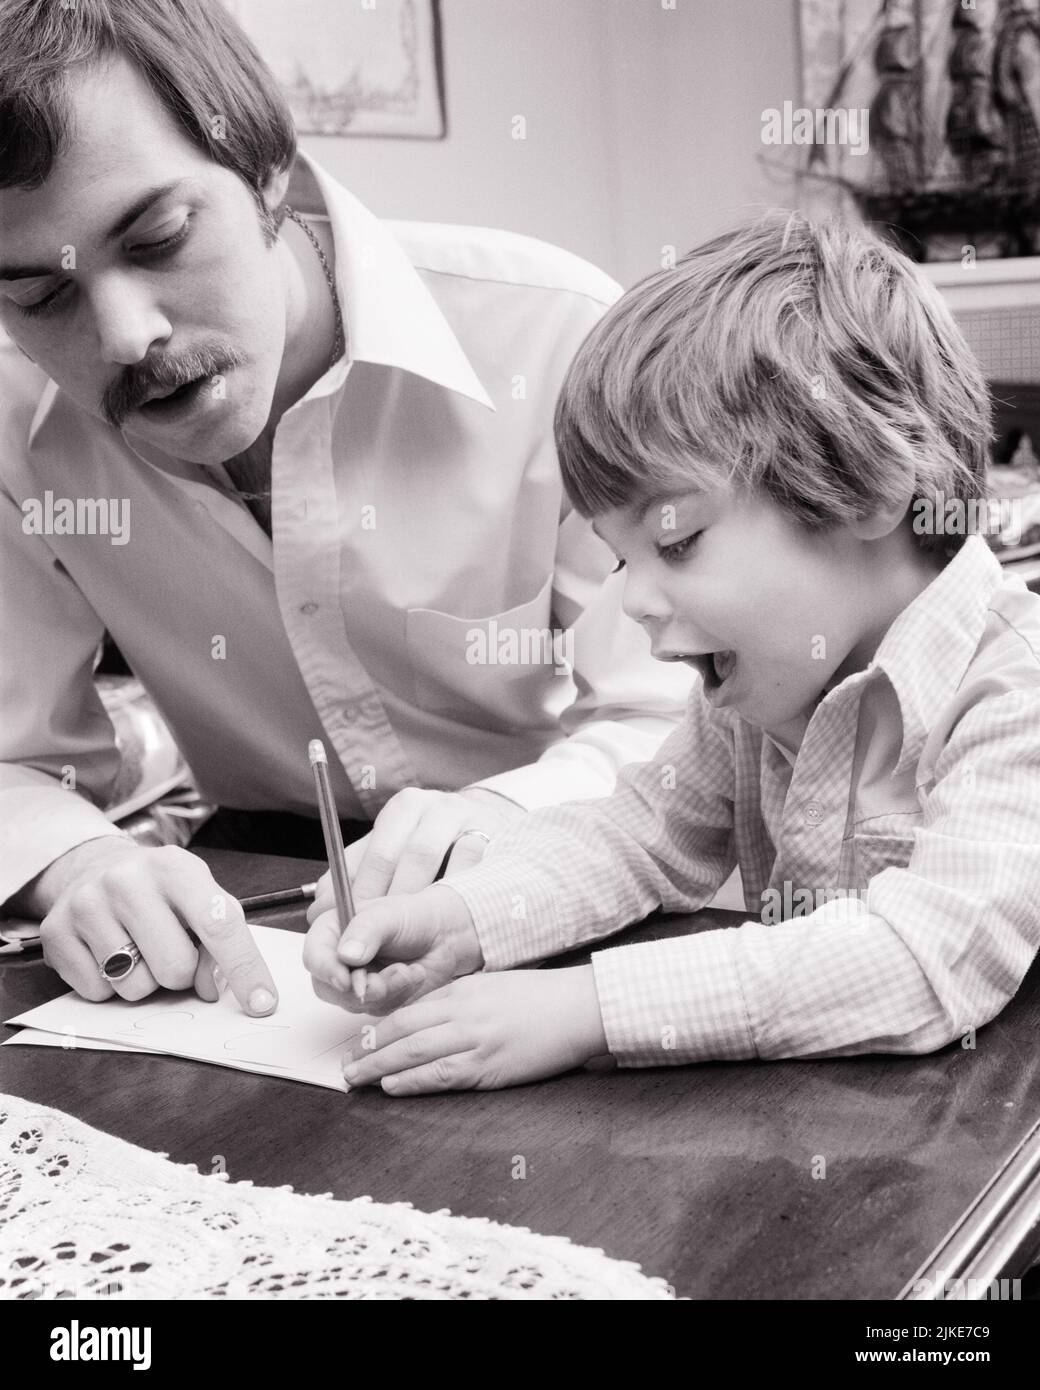 1970s MAN FATHER HELPING BOY HIS EXCITED EAGER YOUNG SON TO PRINT WRITE HIS NAME IN LETTERS WITH A PENCIL - j14024 HAR001 HARS JUVENILE FACIAL COMMUNICATION YOUNG ADULT TEAMWORK SONS JOY LIFESTYLE HOME LIFE COPY SPACE HALF-LENGTH PERSONS INSPIRATION CARING MALES WRITE EXPRESSIONS FATHERS B&W GOALS SUCCESS MUSTACHE HAPPINESS HEAD AND SHOULDERS HIGH ANGLE DISCOVERY HIS NAME STRENGTH MUSTACHES DADS EXCITEMENT PROGRESS PRIDE OPPORTUNITY FACIAL HAIR CONCEPTUAL SUPPORT GROWTH JUVENILES PRECISION TOGETHERNESS YOUNG ADULT MAN BLACK AND WHITE CAUCASIAN ETHNICITY HAR001 OLD FASHIONED Stock Photo